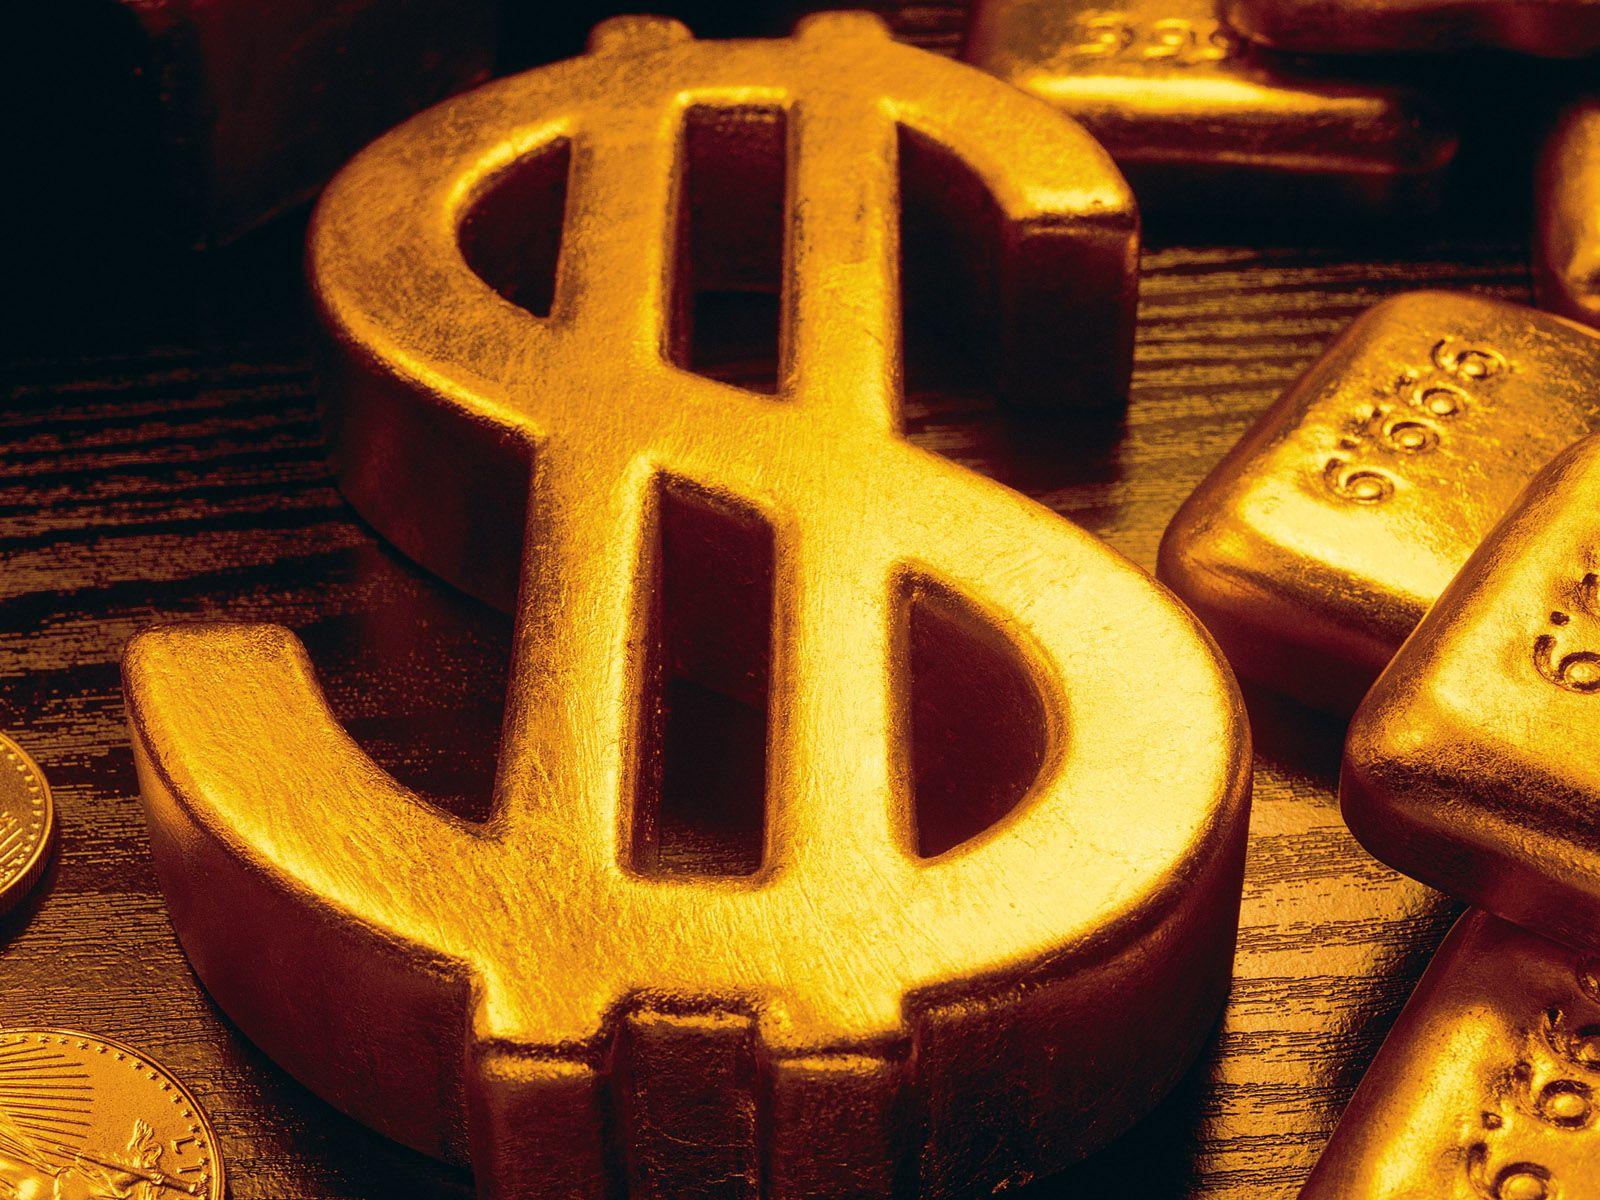 Golden Dollar wallpaper and image, picture, photo